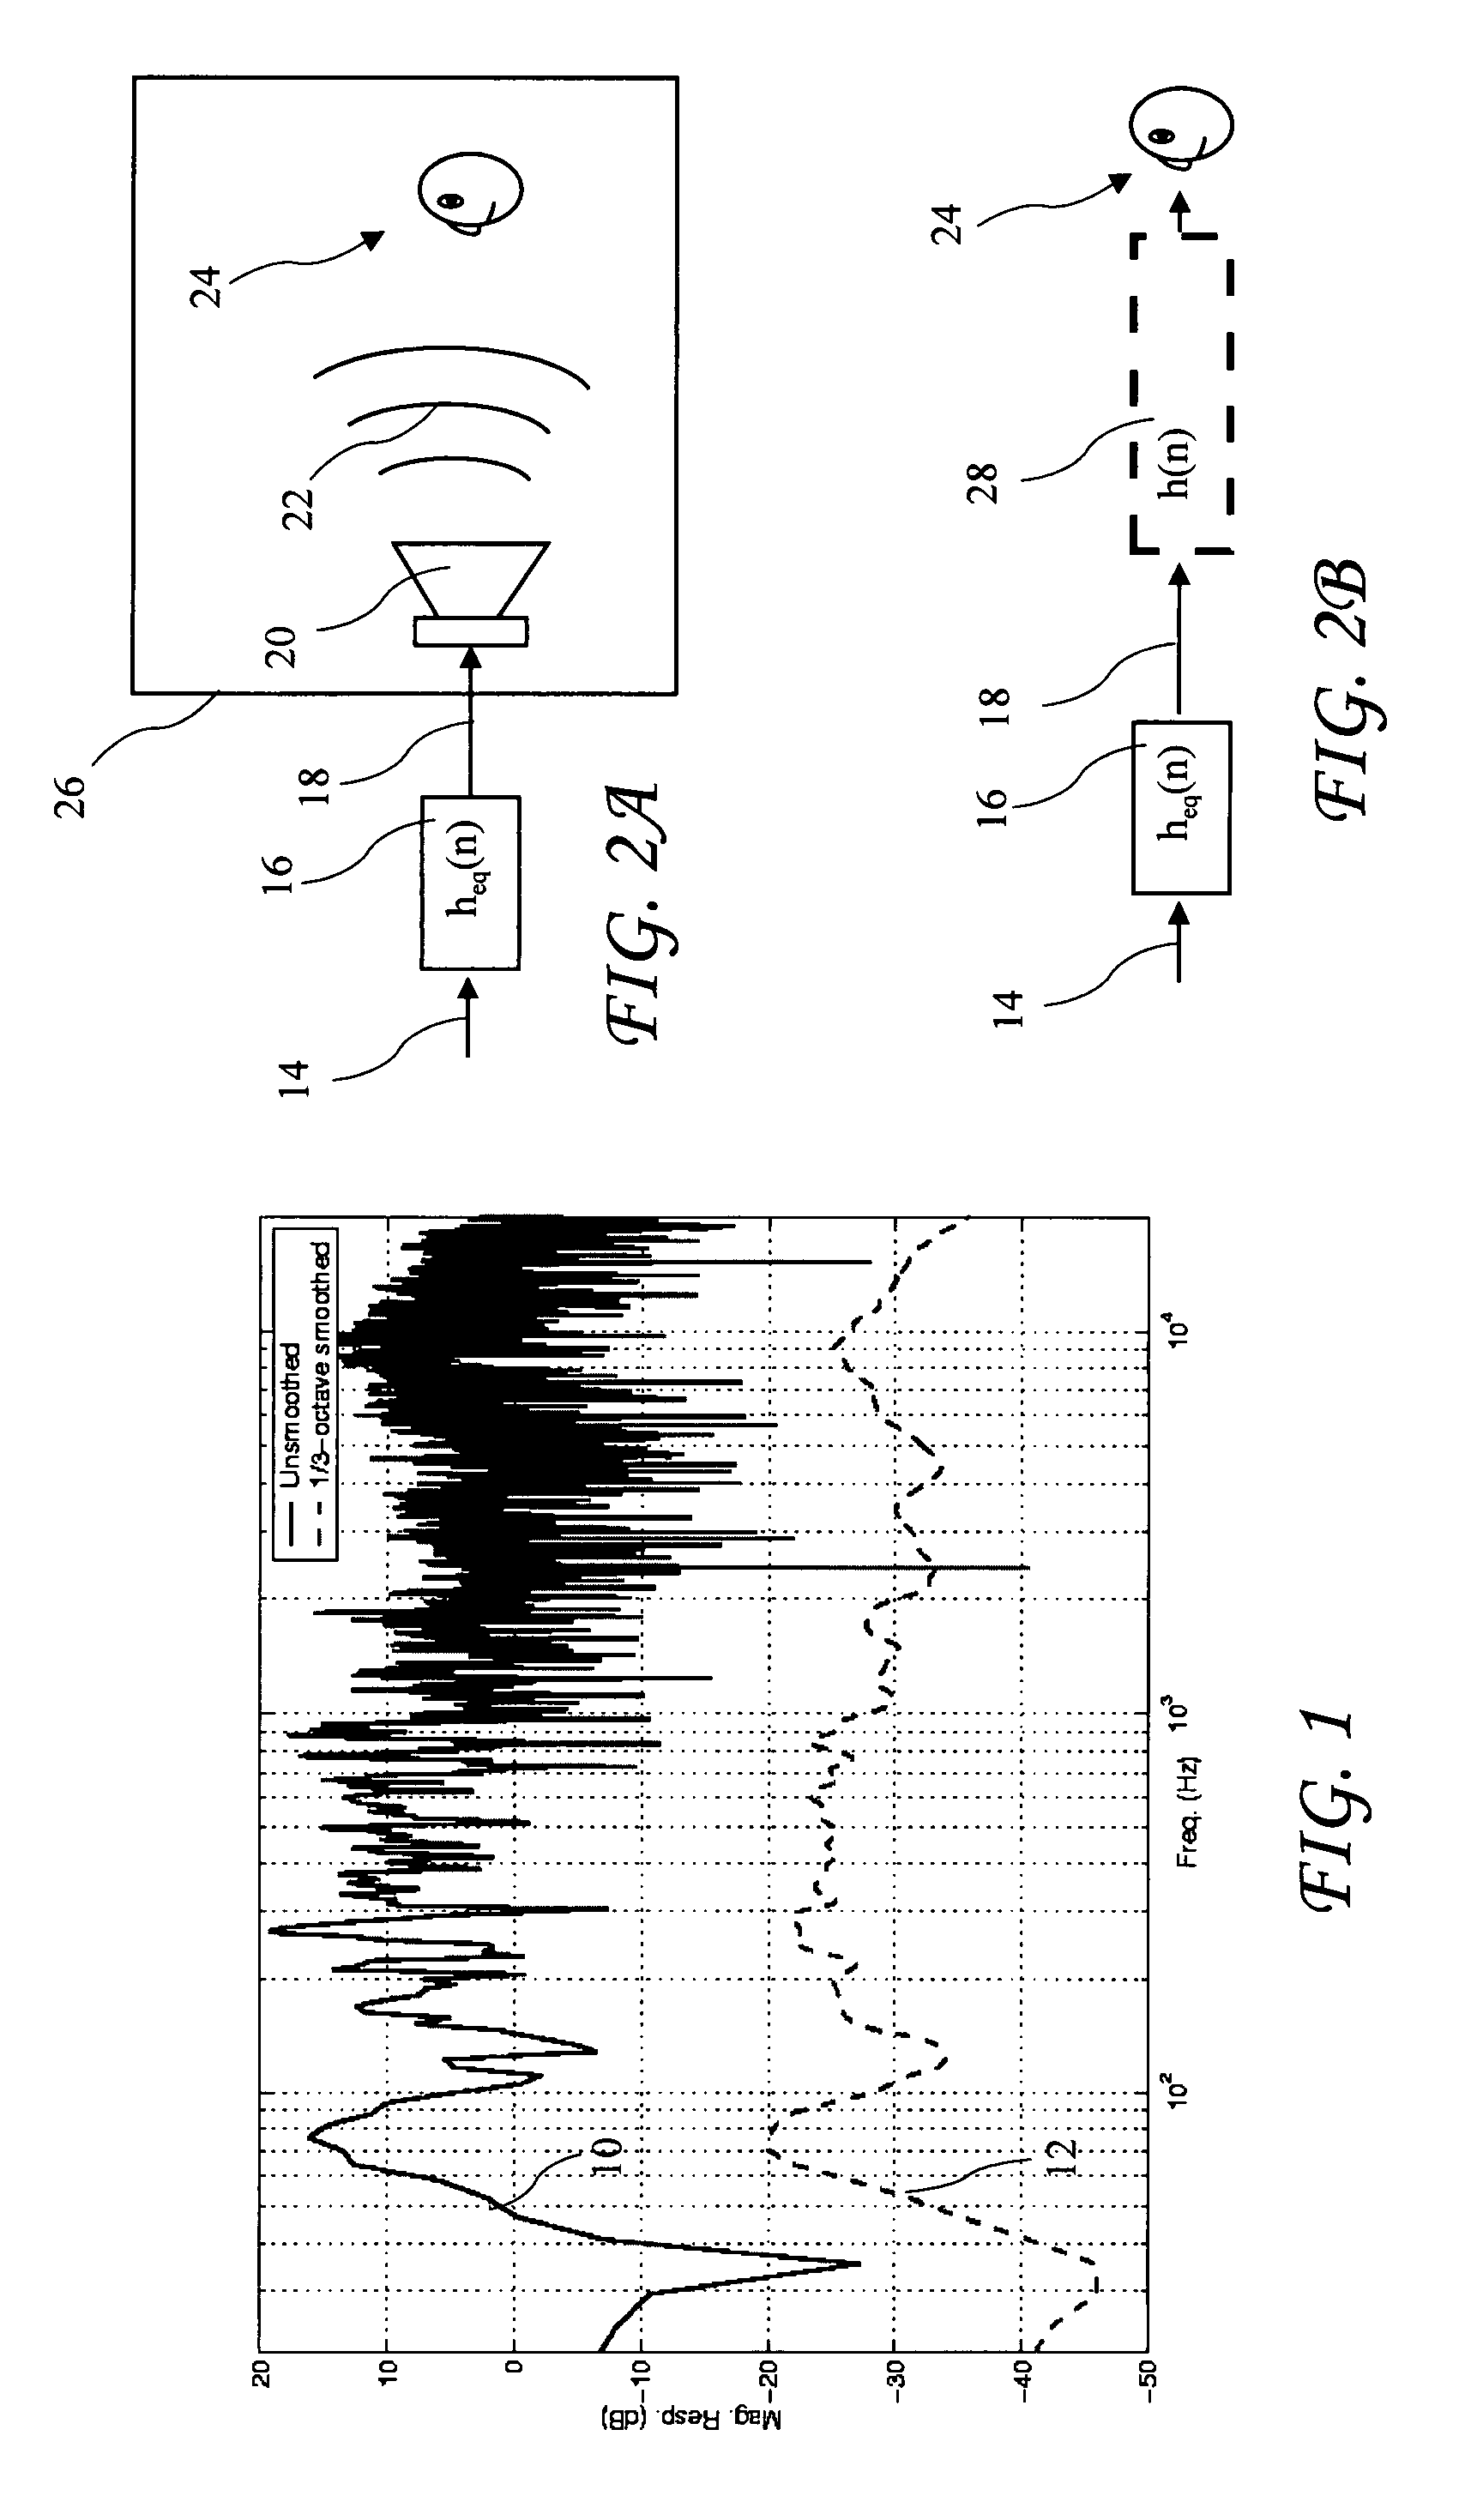 Combined multirate-based and fir-based filtering technique for room acoustic equalization